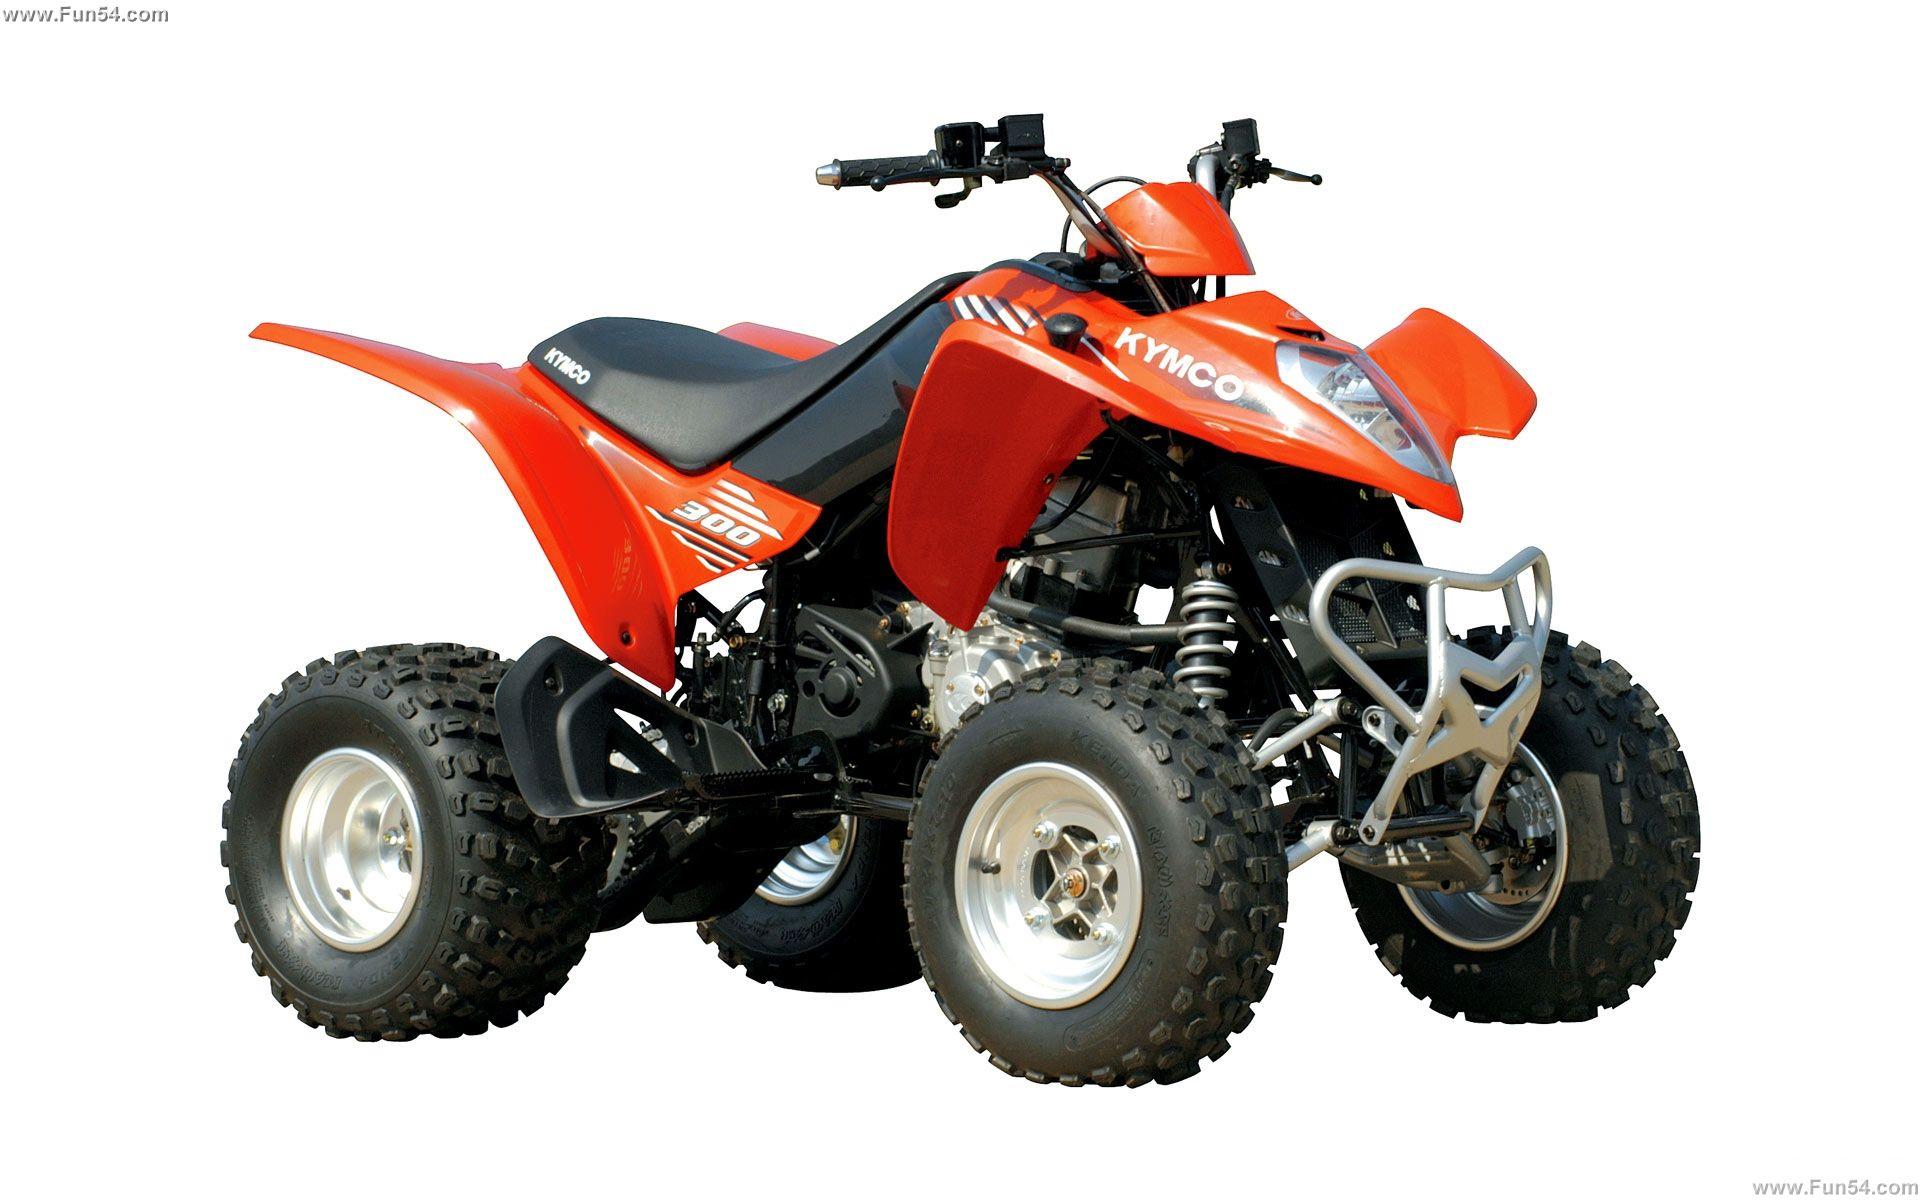 Image of Four Wheeler Wallpapers.